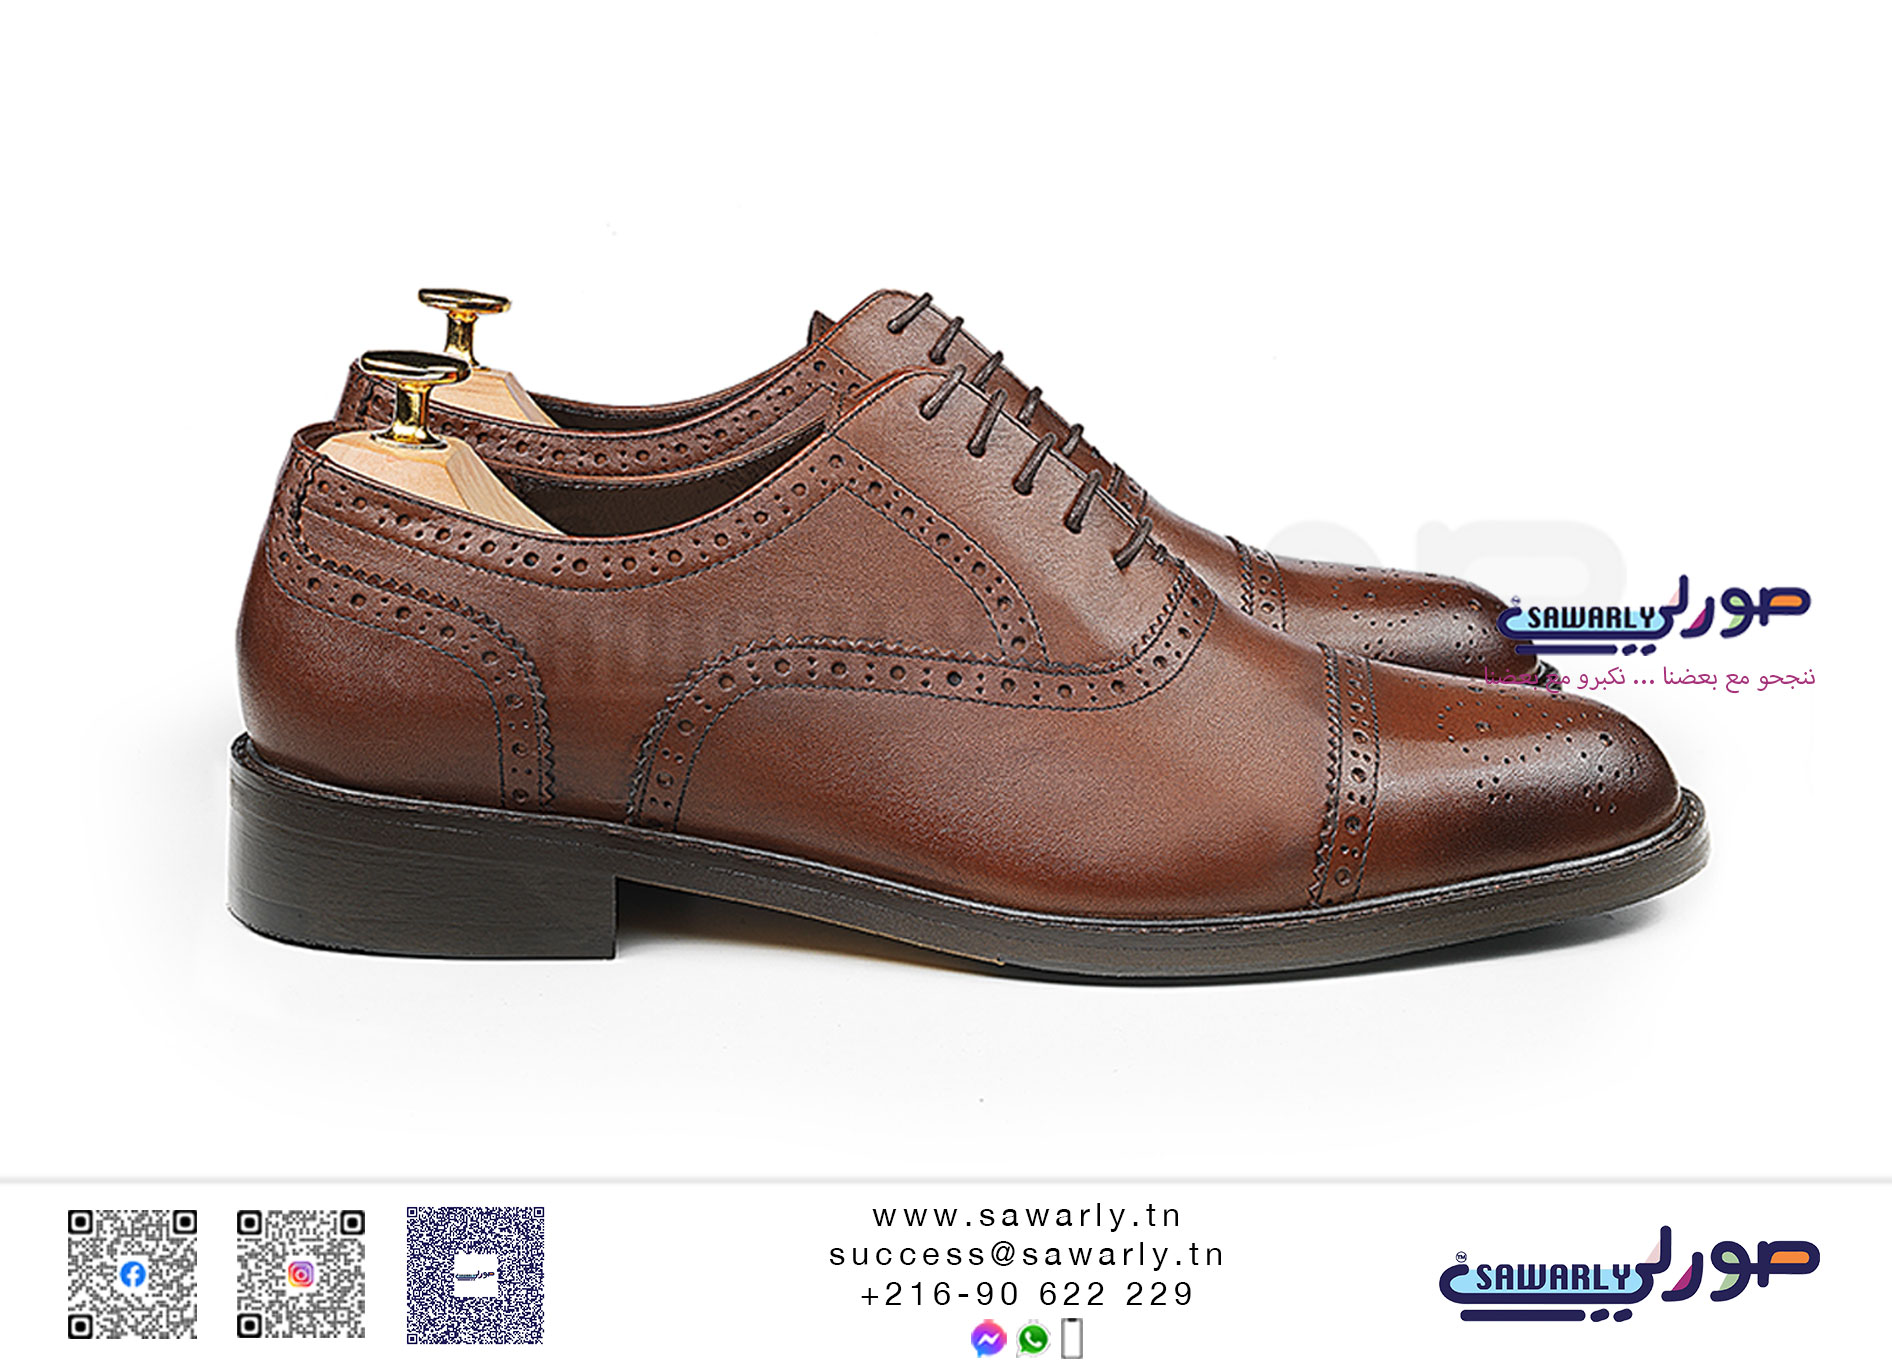 shooting de produits industrielle professionnelle sur fond blanc tunisie, product photography on white background isolated professional, shoes, leather, men ware, chaussures, cuir, articles pour hommes,